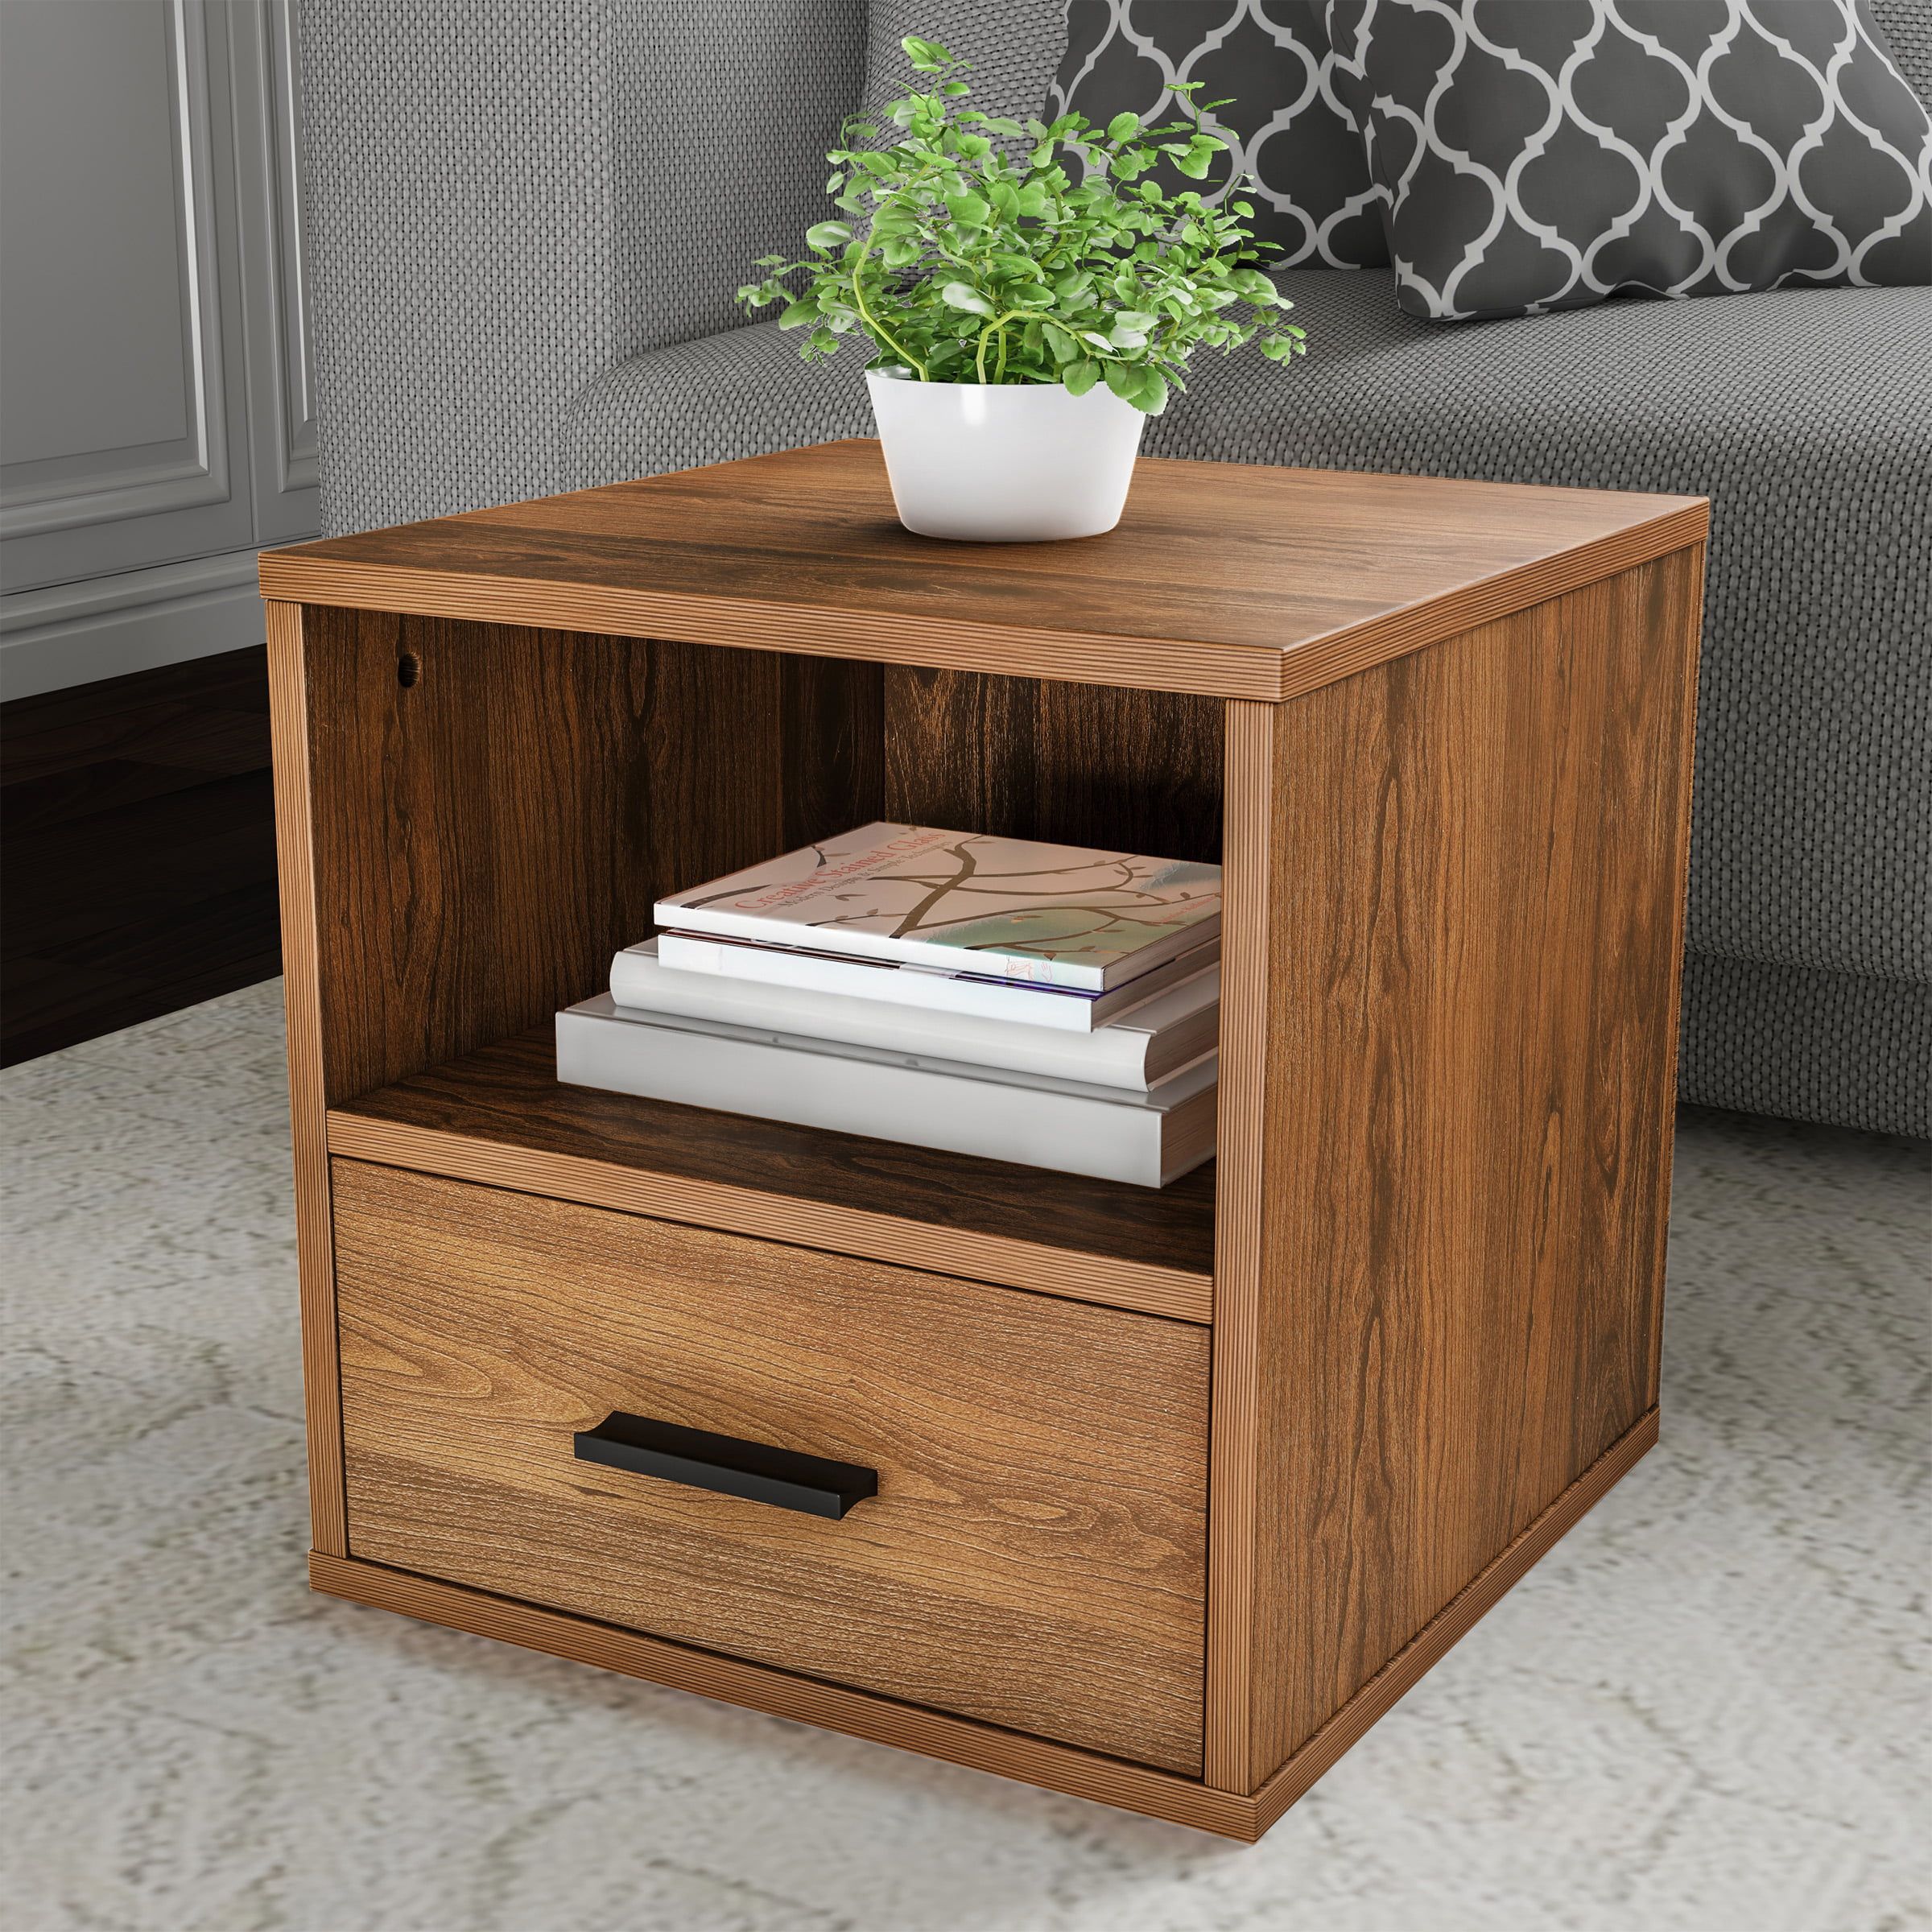 Somerset Home Modular End Table With Drawer & Shelf (brown) – Walmart In Freestanding Tables With Drawers (Gallery 1 of 20)